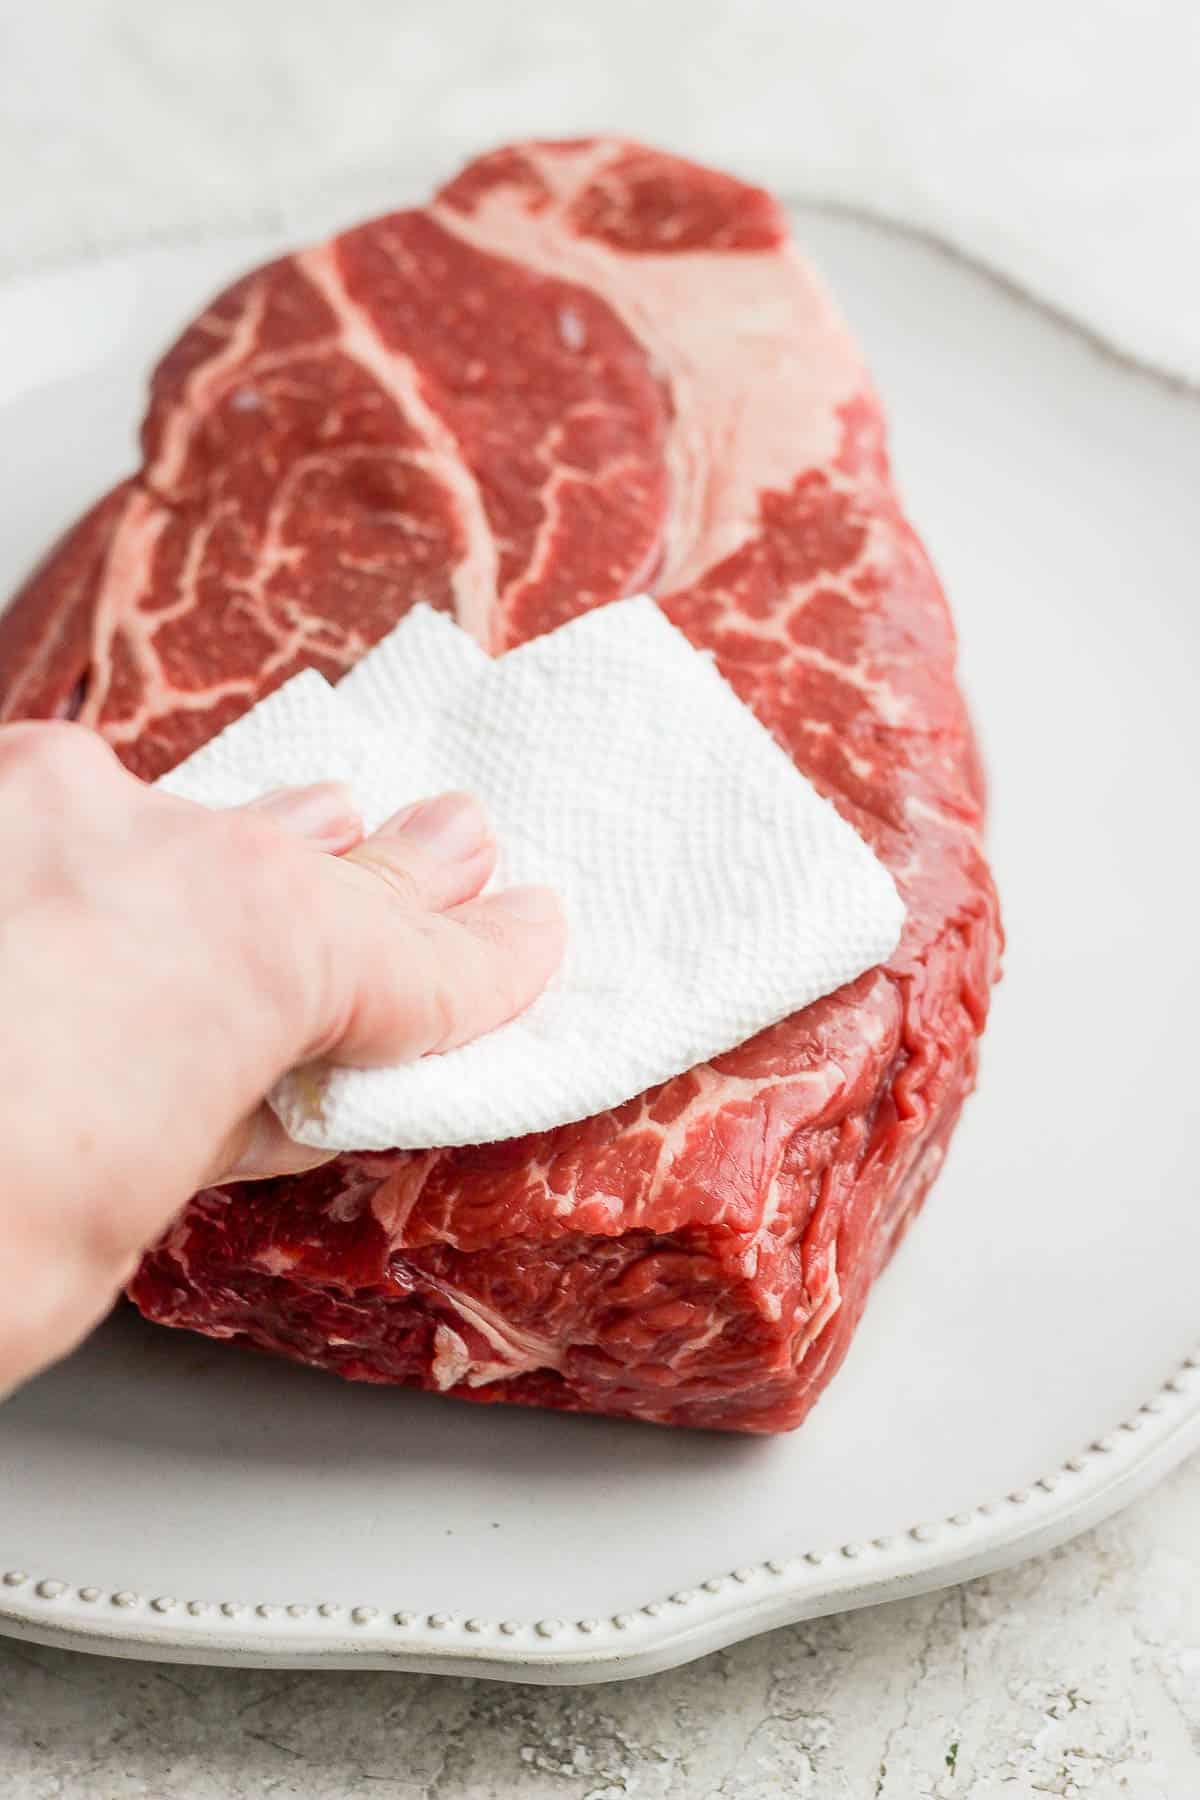 A chuck roast being pat dry on a white plate.